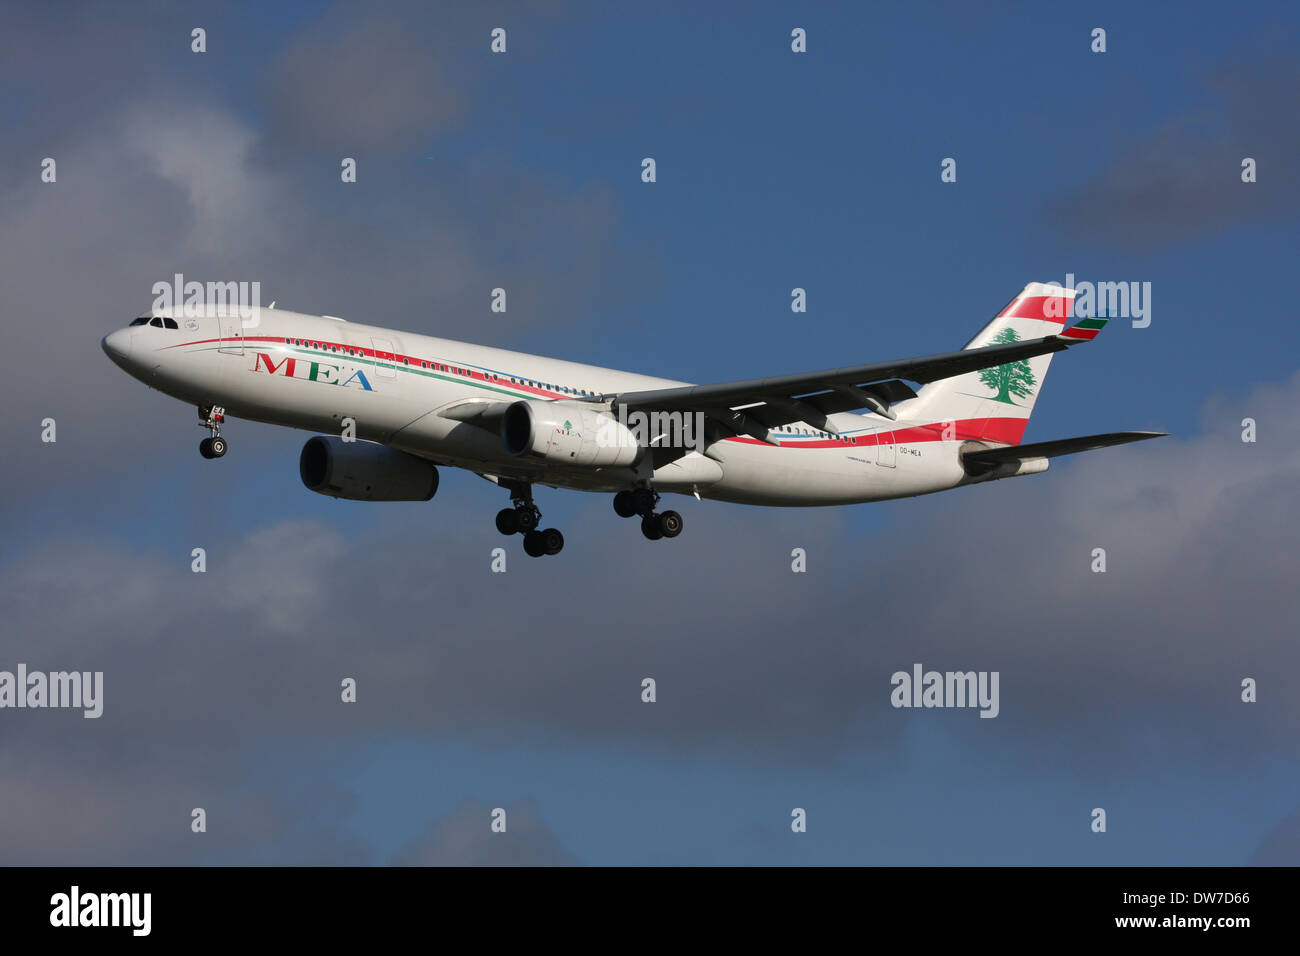 MEA MIDDLE EASTERN AIRLINES AIRBUS A330 Stock Photo